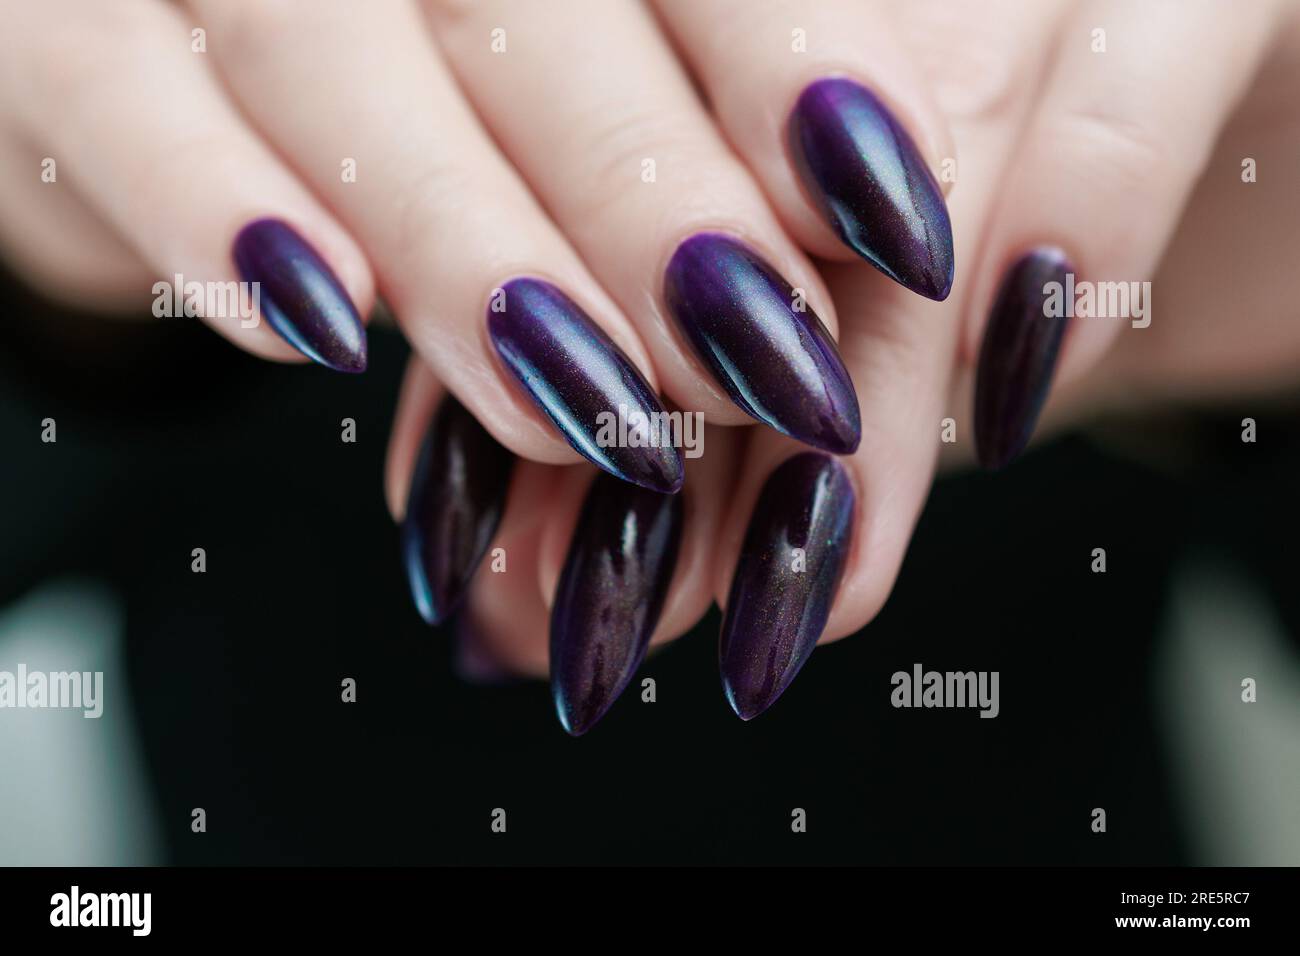 How to Do Ombre Gel Nails | Step by Step Tutorial |